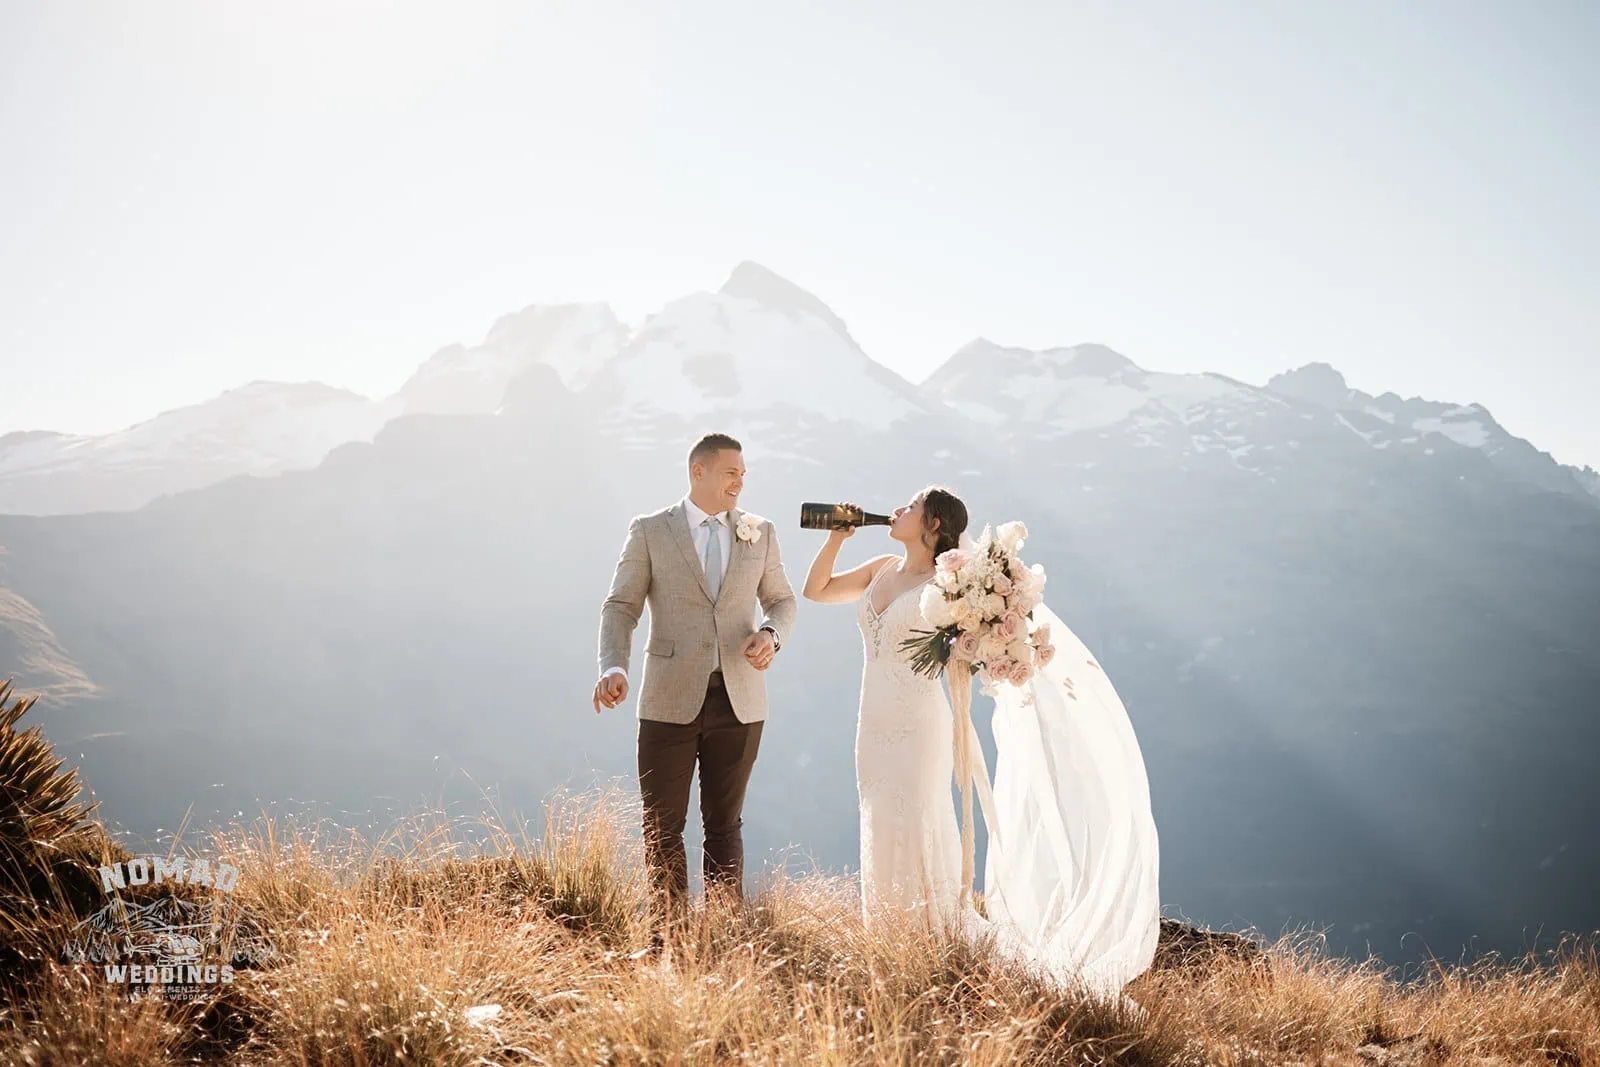 Amy & Eden standing on top of a hill with enchanting mountains in the background | Lake Erskine elopement.